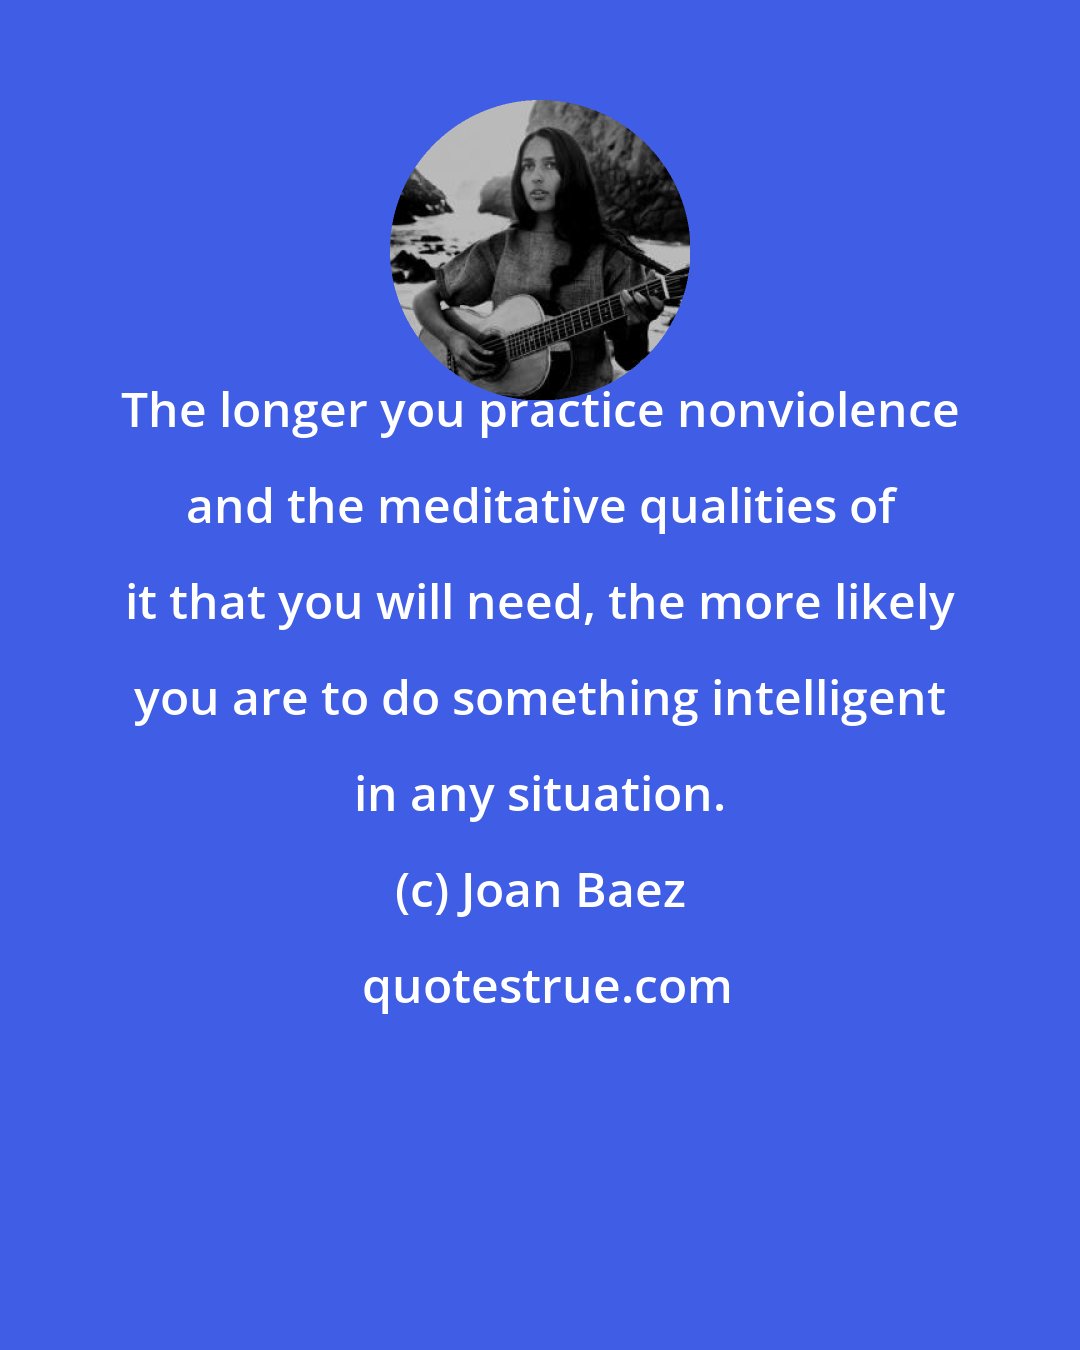 Joan Baez: The longer you practice nonviolence and the meditative qualities of it that you will need, the more likely you are to do something intelligent in any situation.